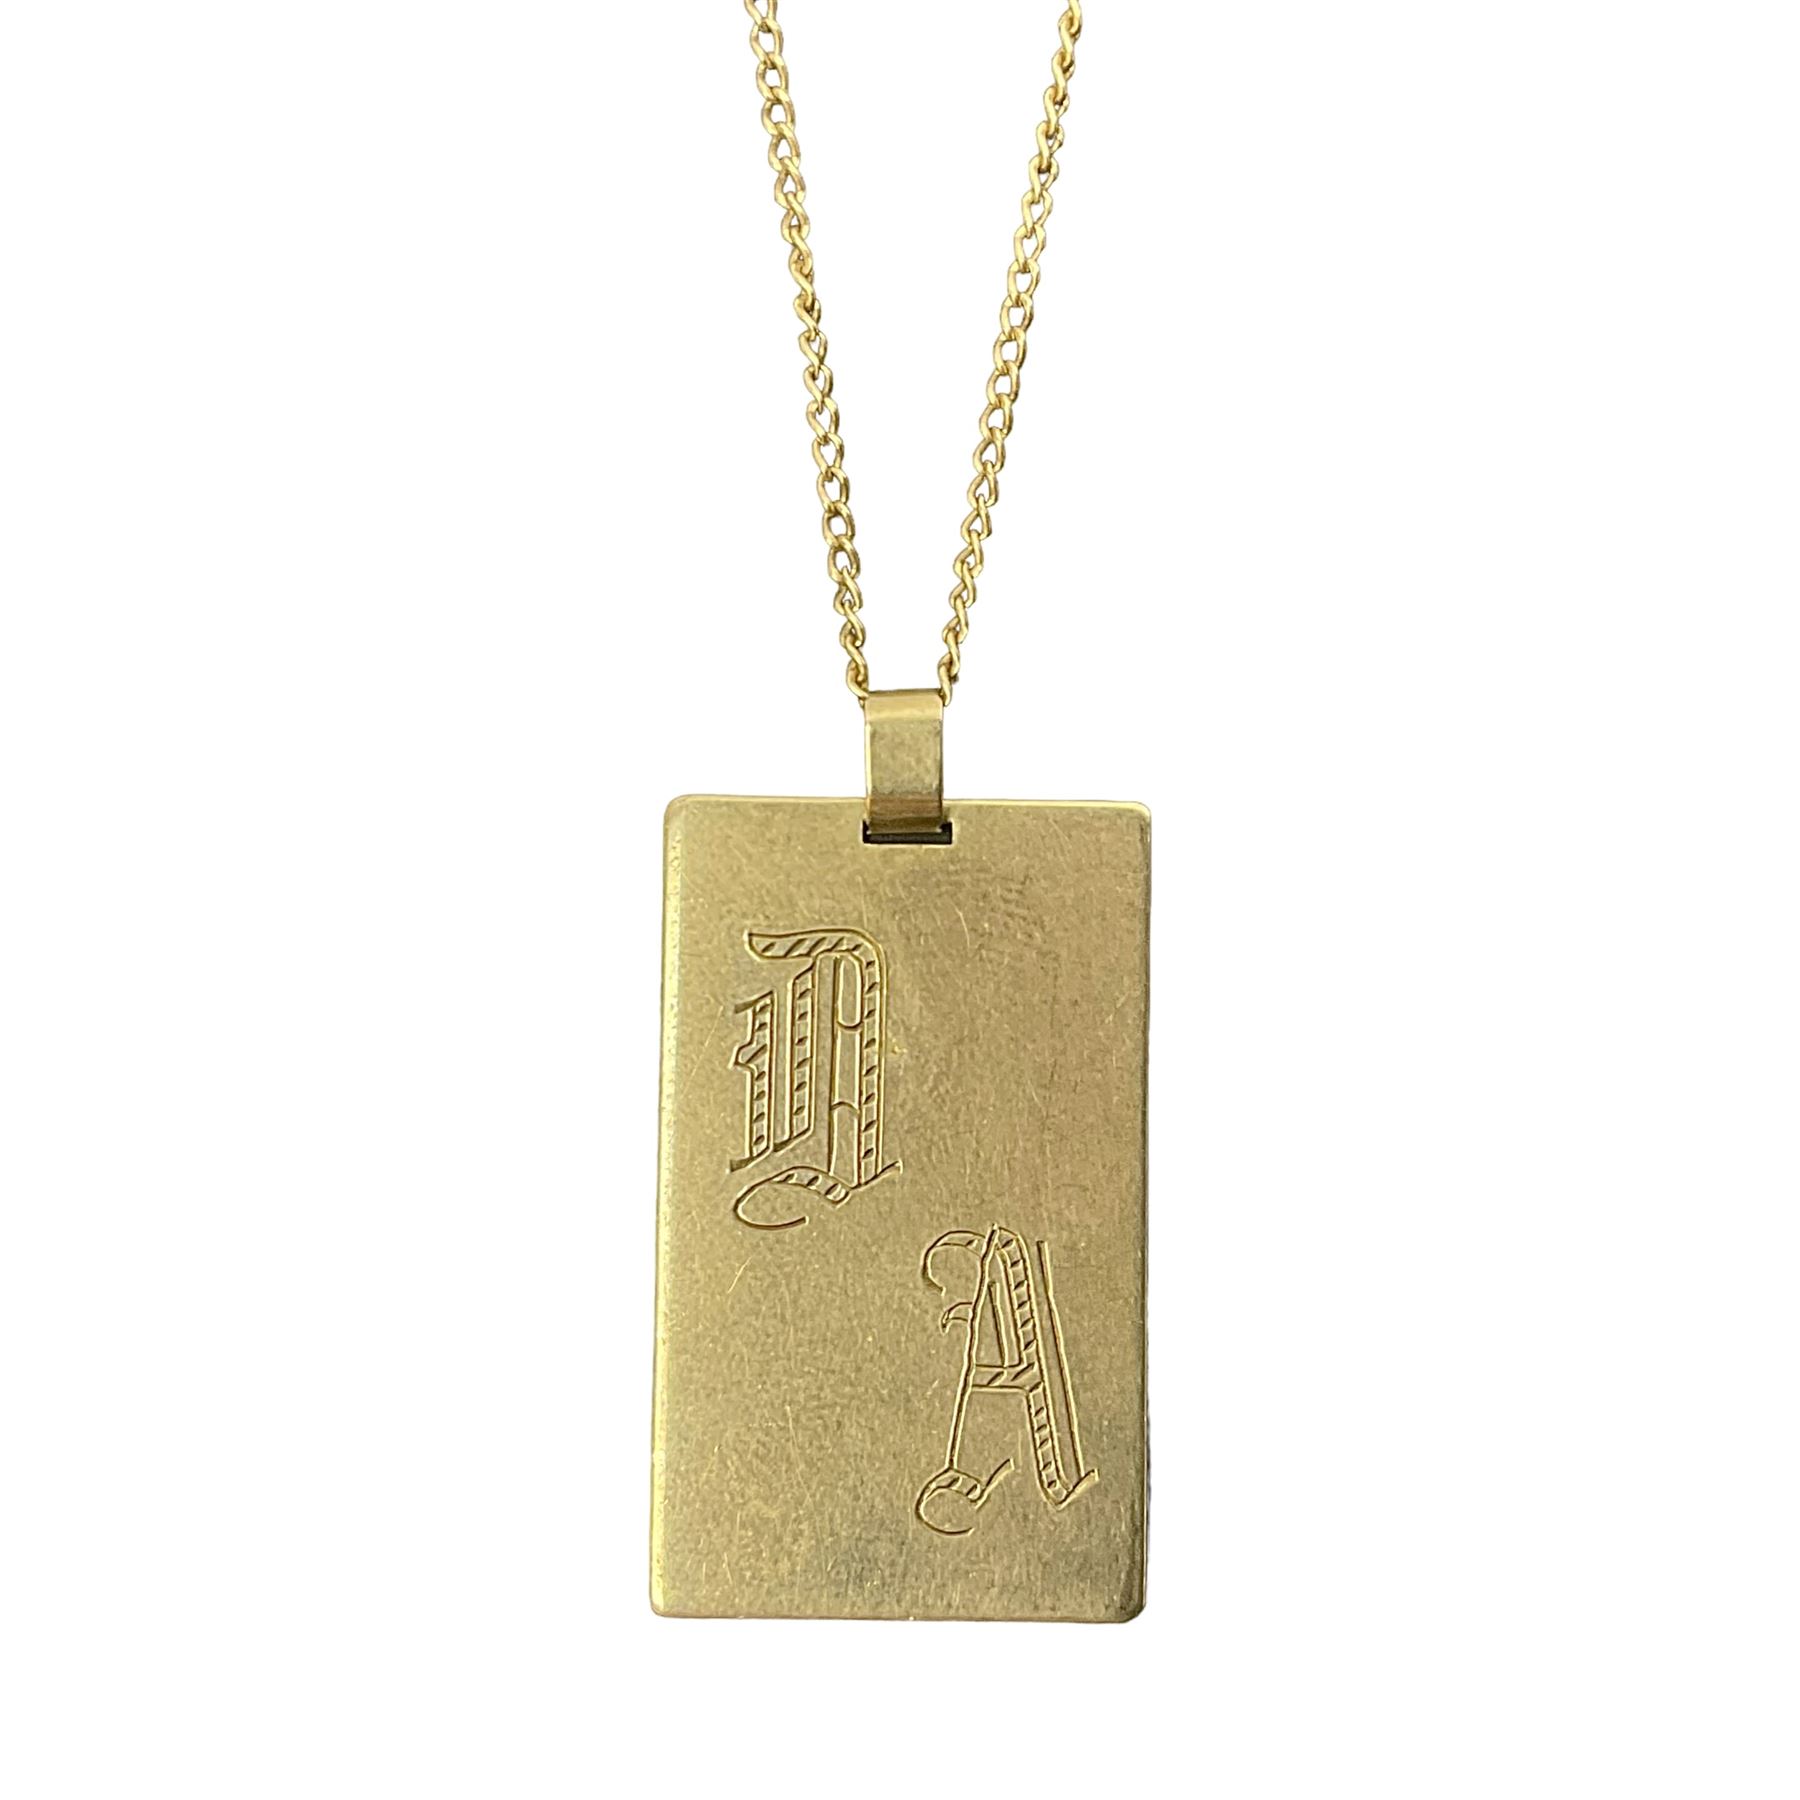 9ct gold identity tag pendant necklace